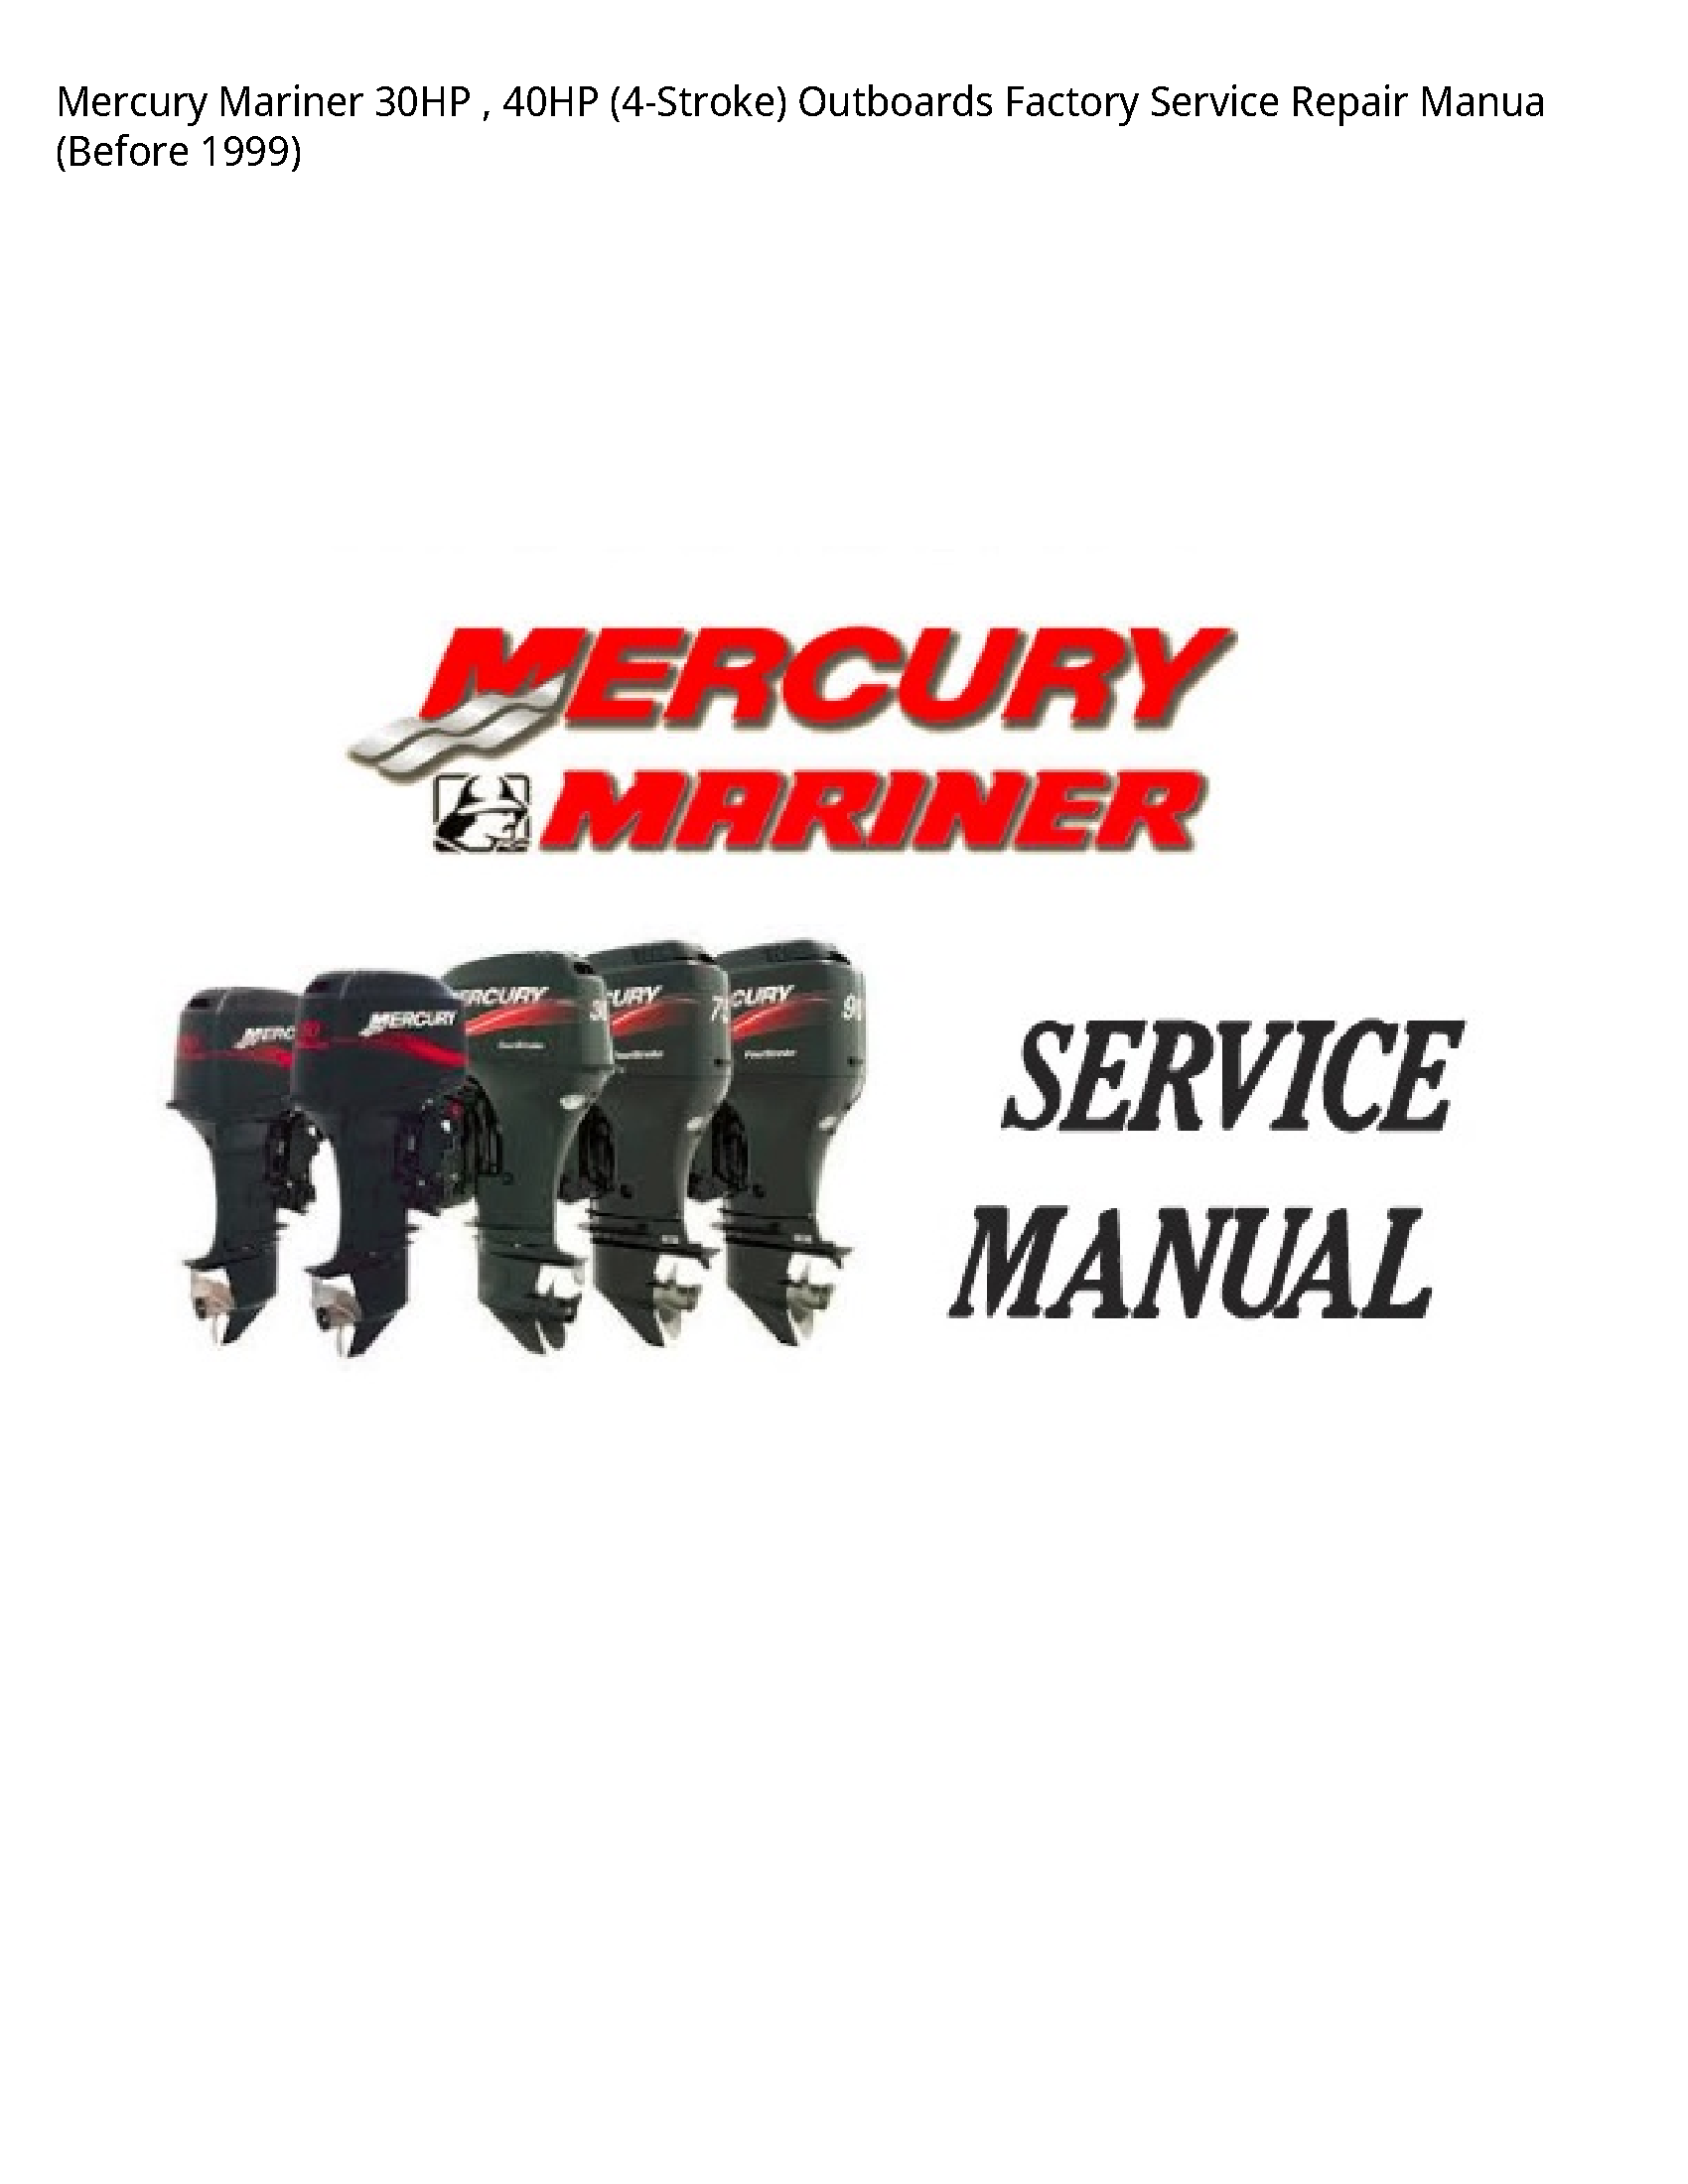 Mercury Mariner 30HP Outboards Factory manual